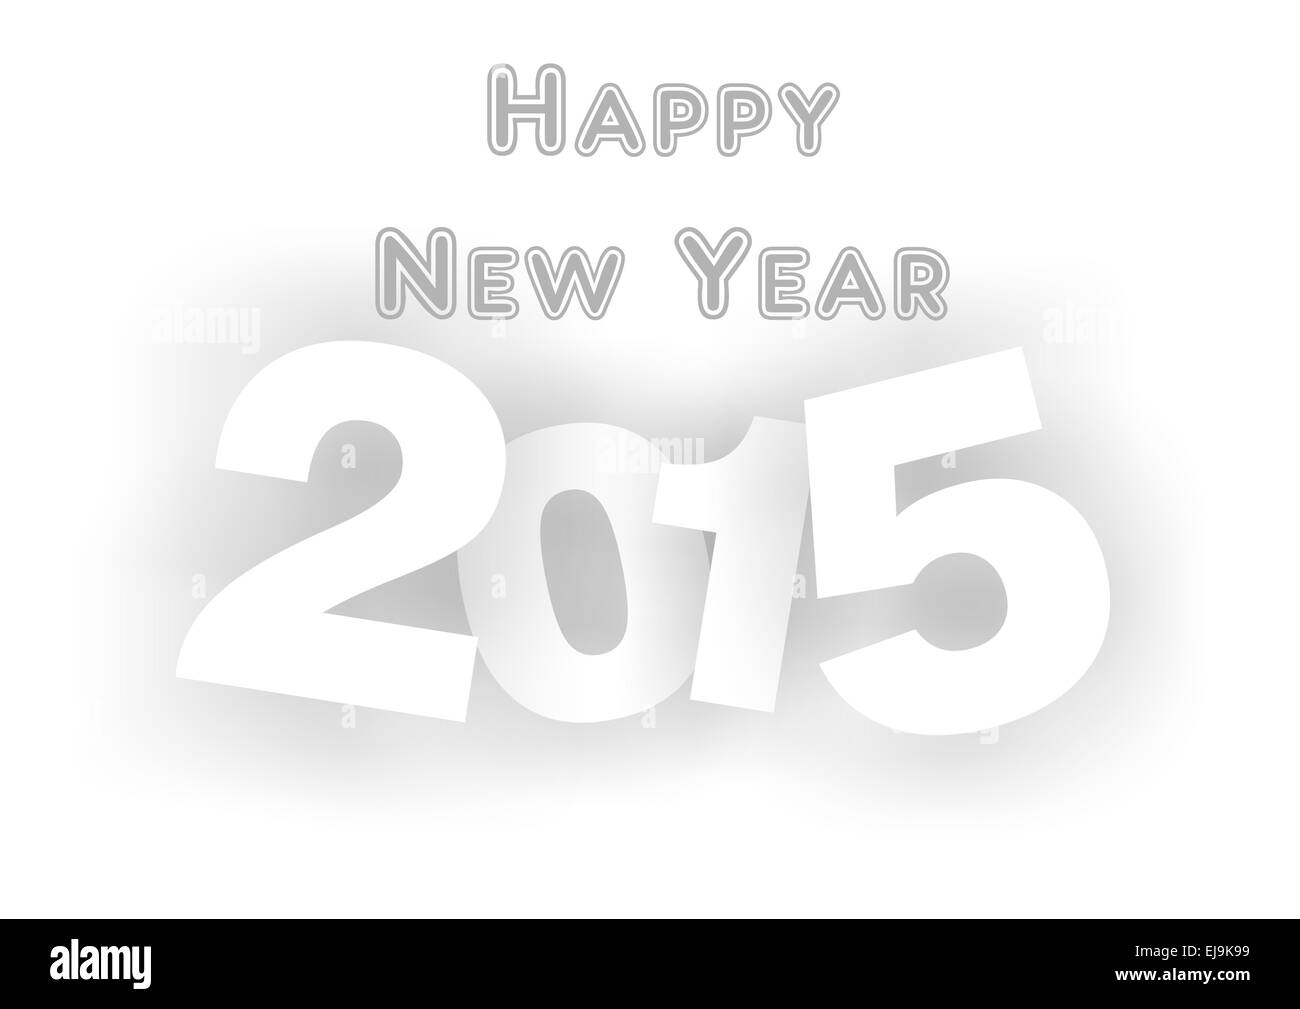 illustration for happy new year 2015 Stock Photo